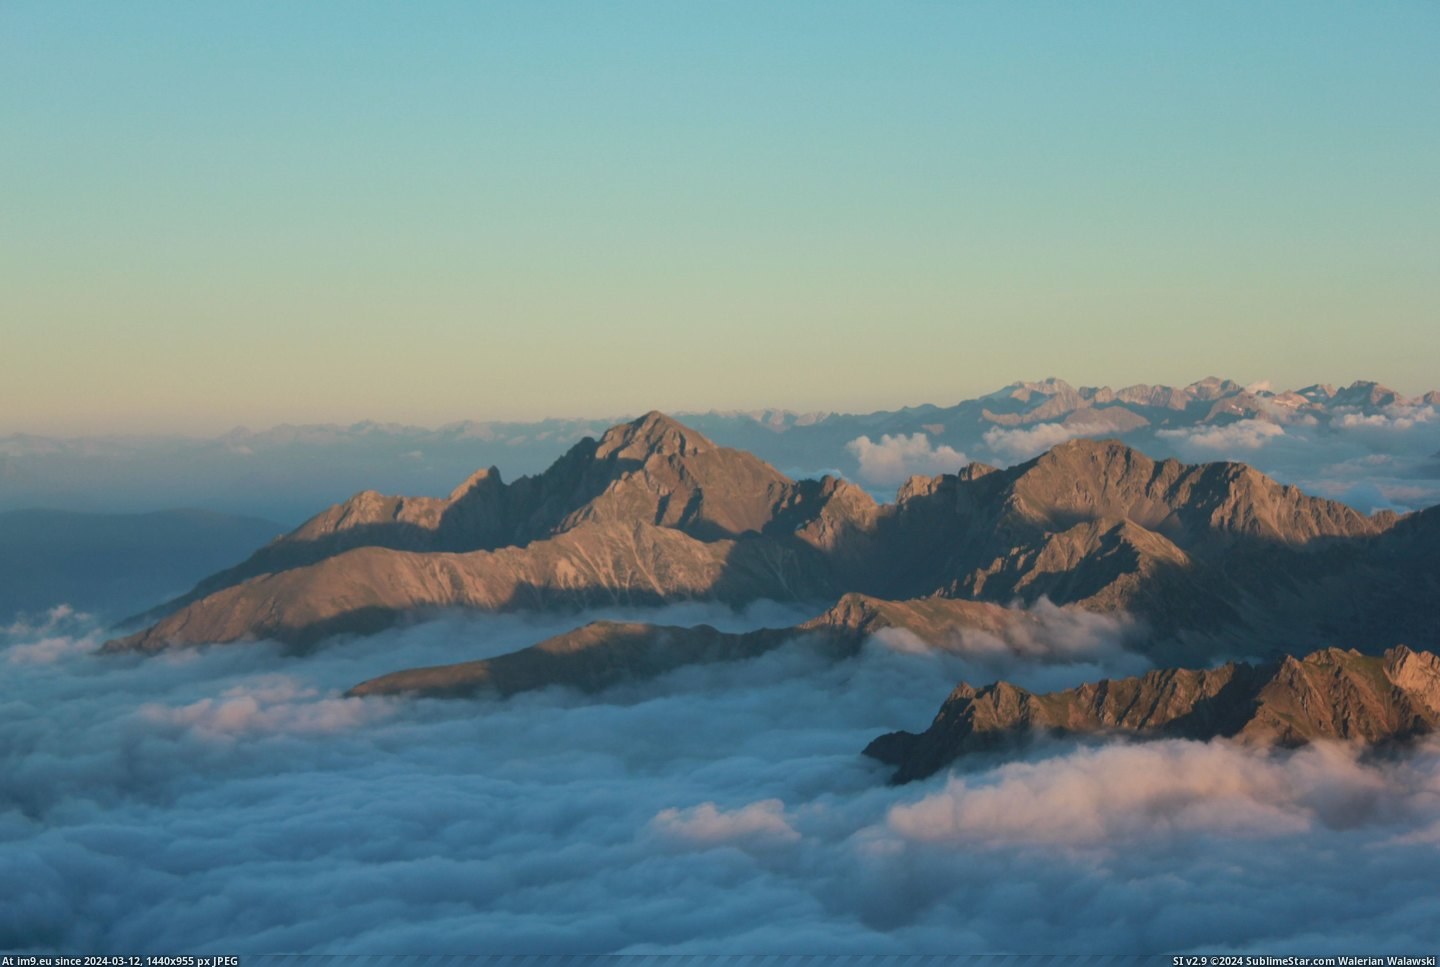 #Sea #Late #France #Central #Midi #Pyrenees #Bigorre #Afternoon #Clouds #East [Earthporn] Late afternoon above the sea of clouds: looking east over the central Pyrenees, Pic du Midi de Bigorre, France [3456 Pic. (Image of album My r/EARTHPORN favs))